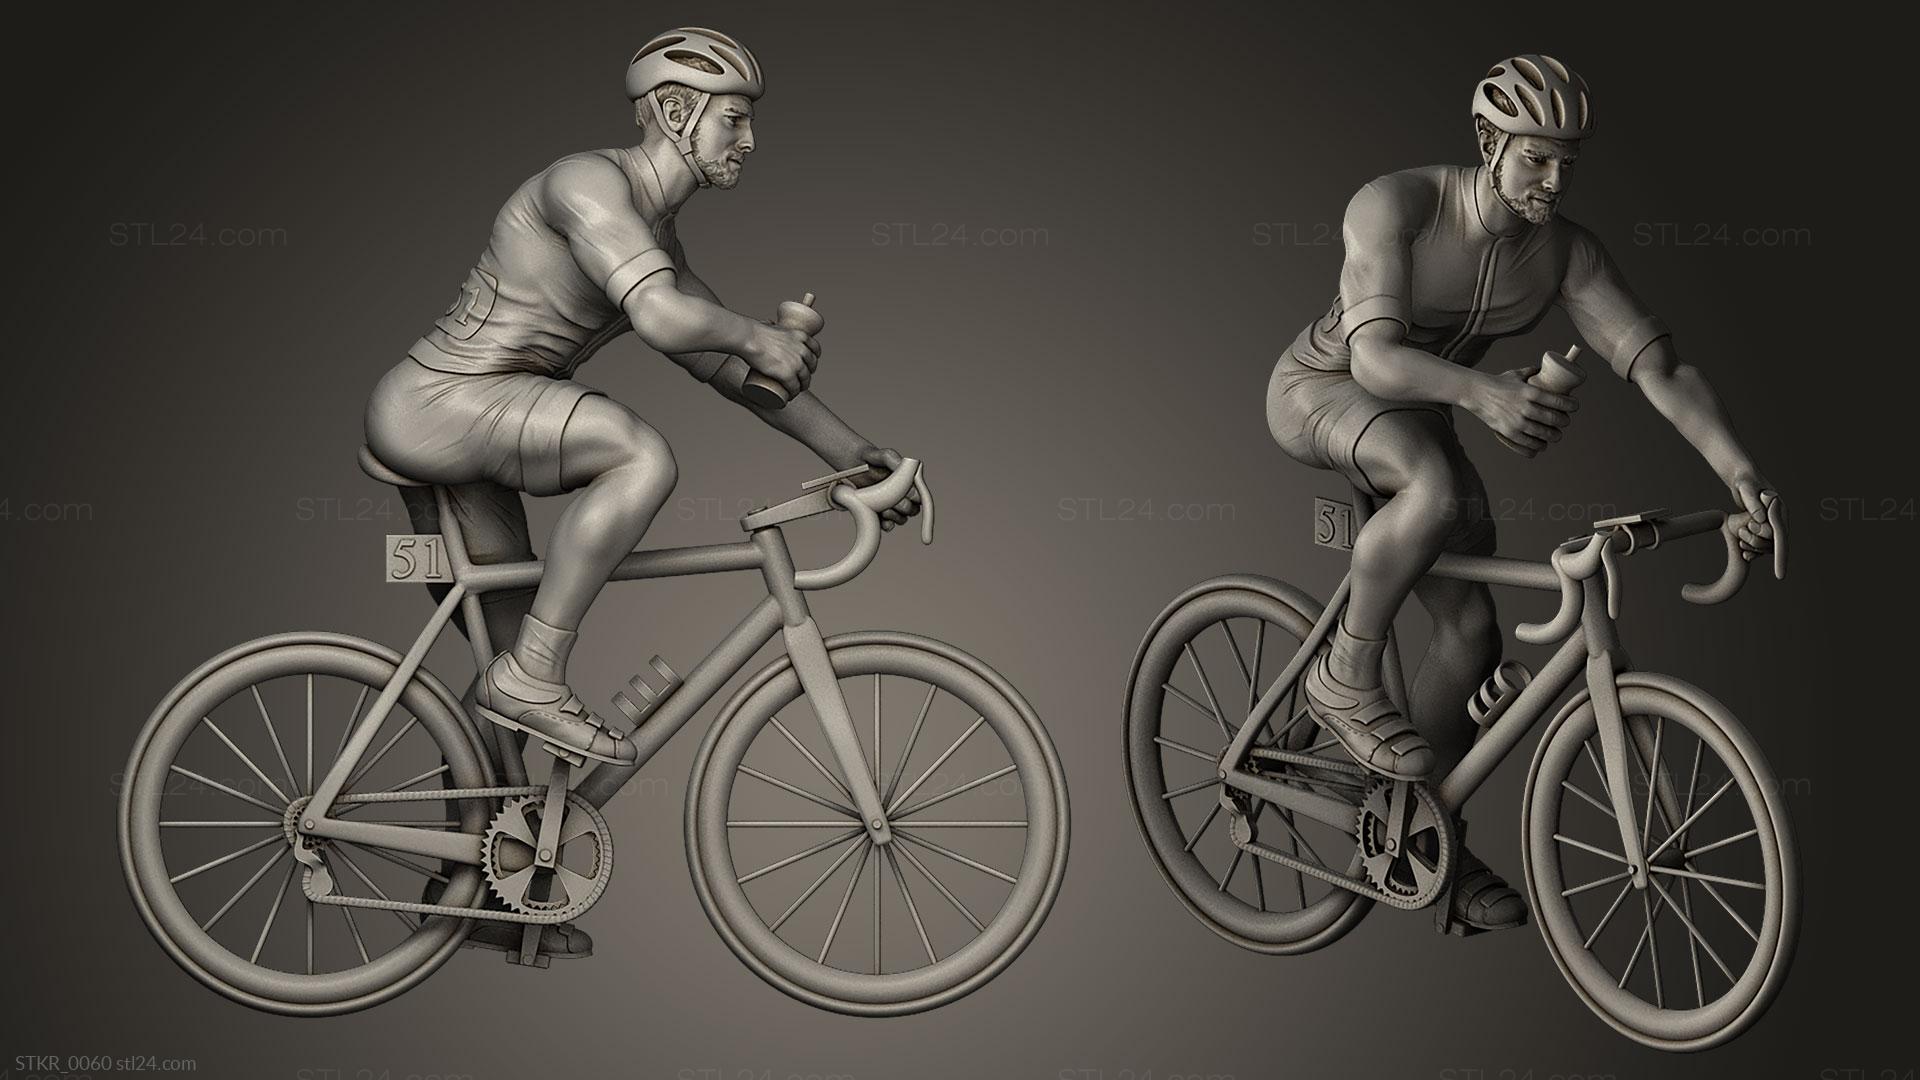 Miscellaneous figurines and statues - Cyclist, STKR_0060. 3D stl model for  CNC